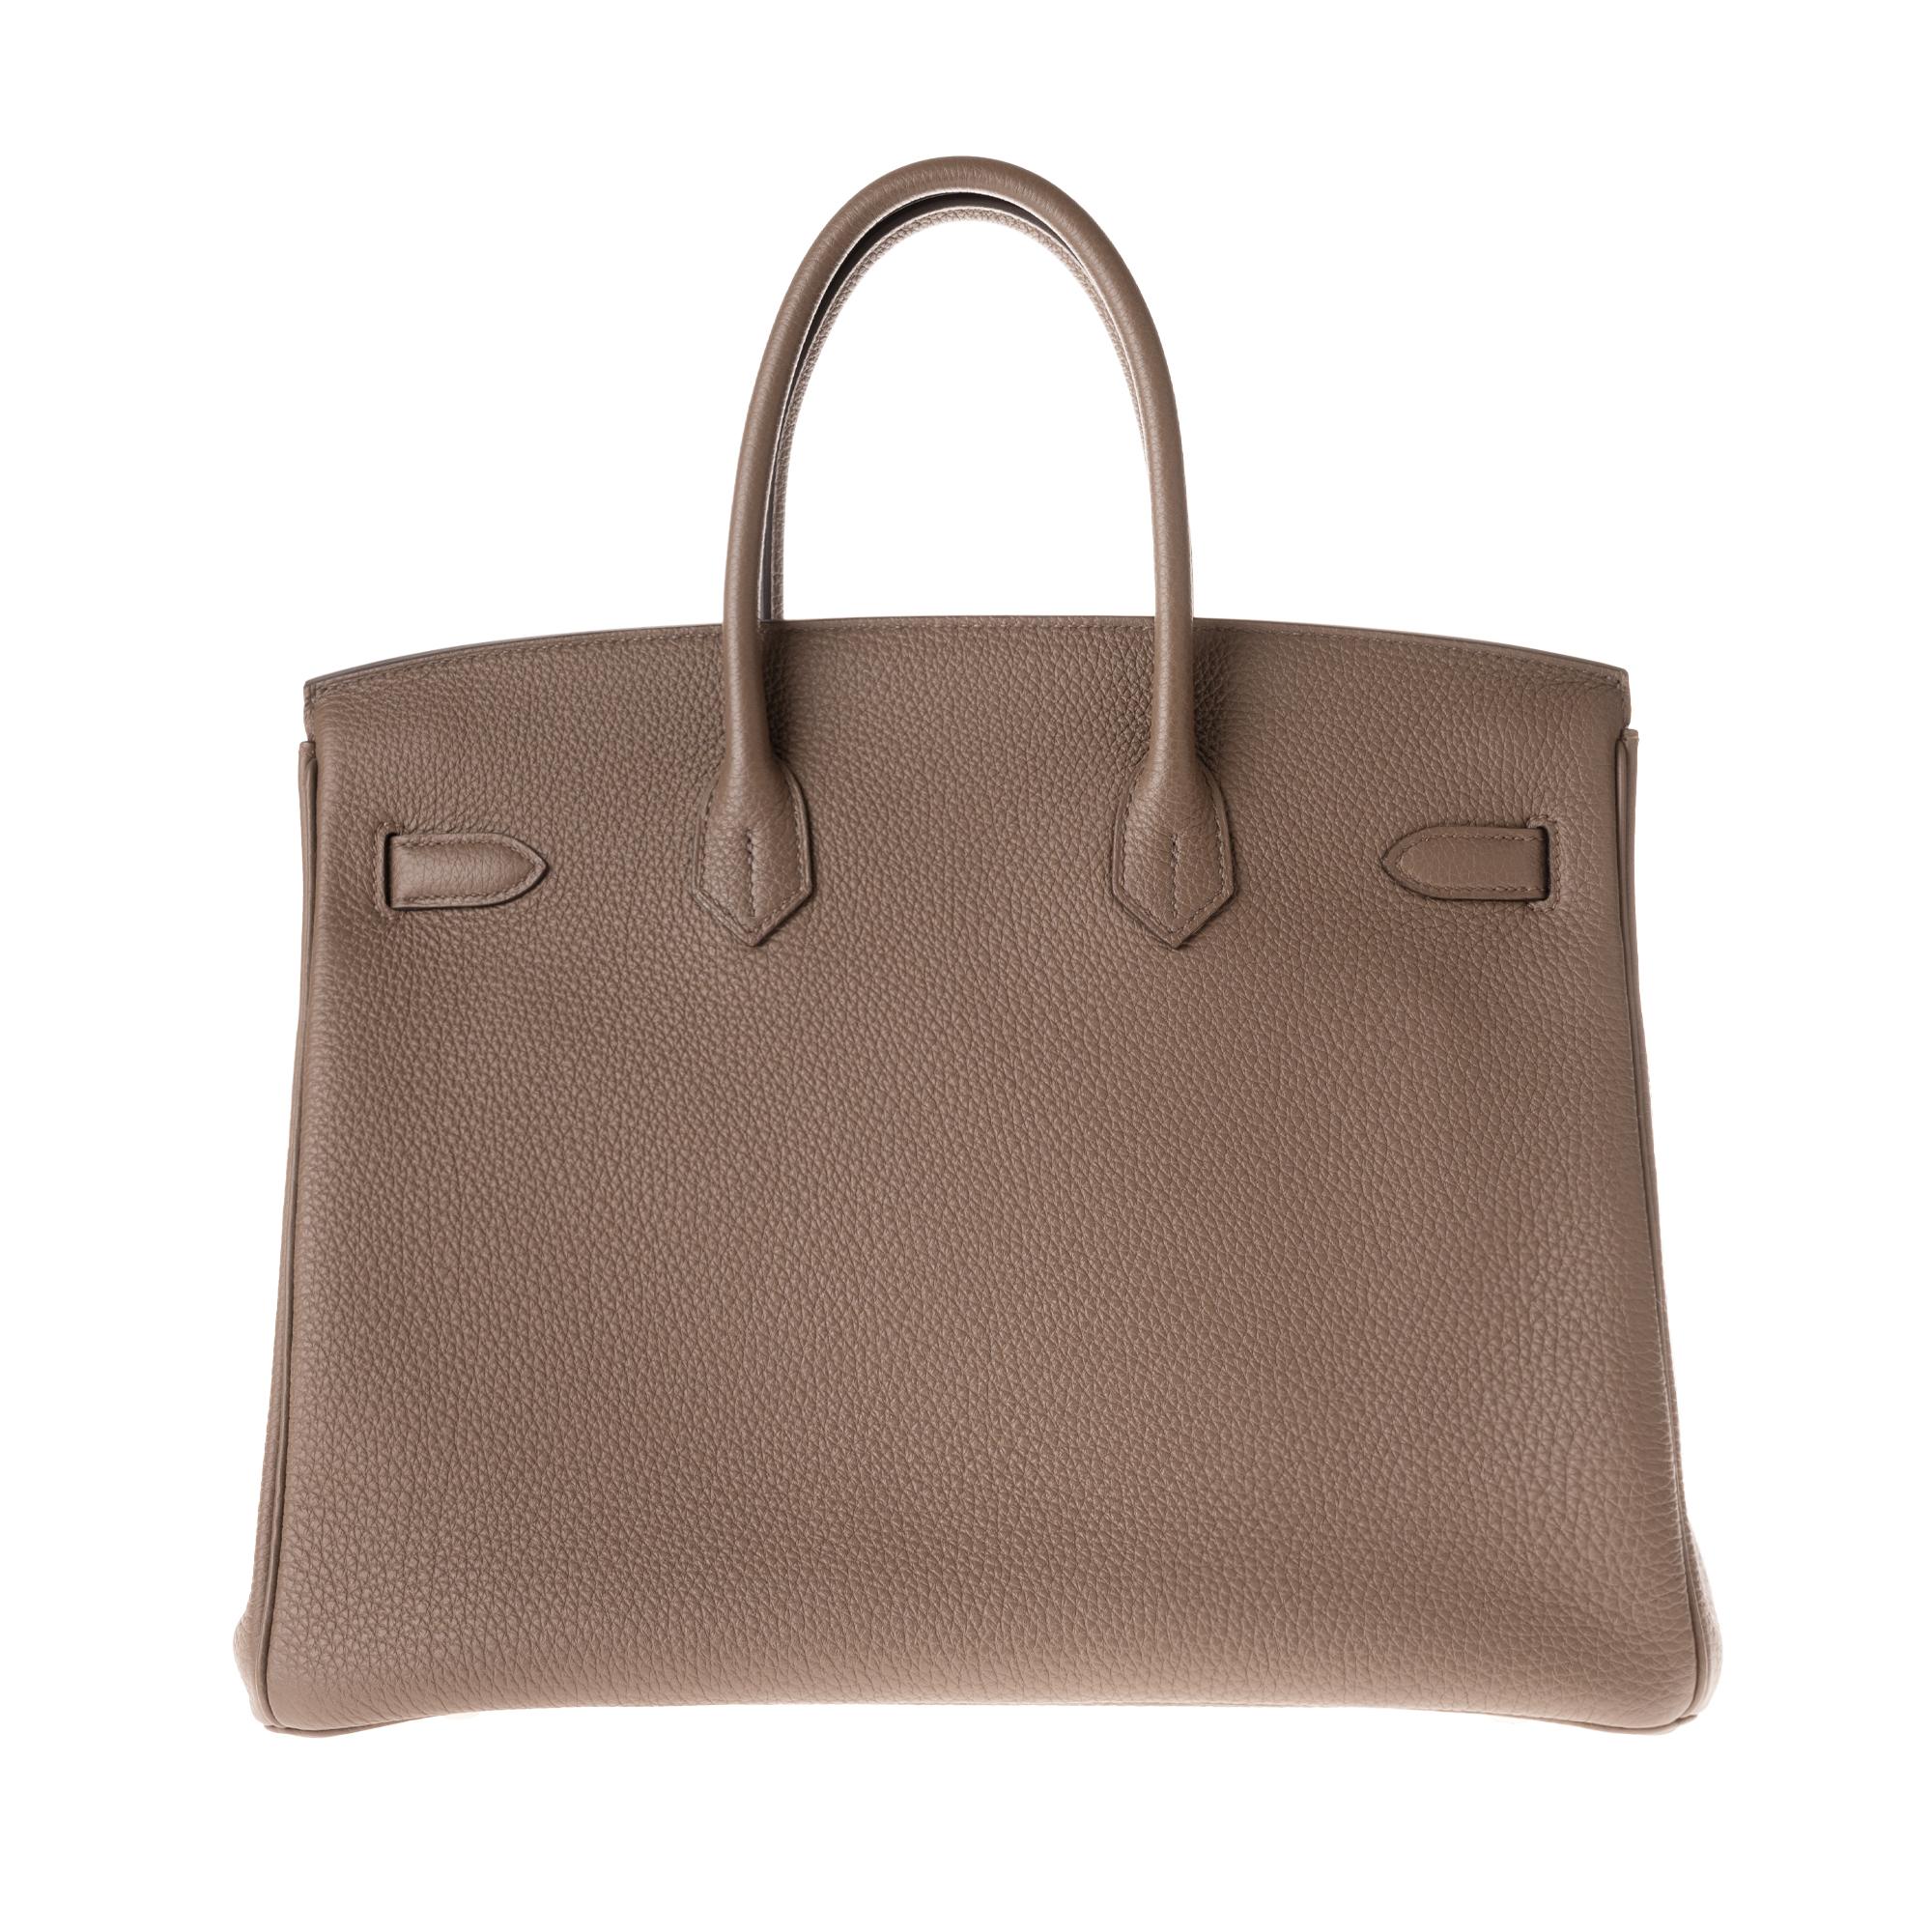 Stunning handbag Hermes Birkin 35 cm in Togo leather color Taupe, Silver metal trim, double handle in taupe leather allowing a handheld.

Closure by flap.
Taupe leather inner lining, zip pocket, patch pocket.
Signature: 